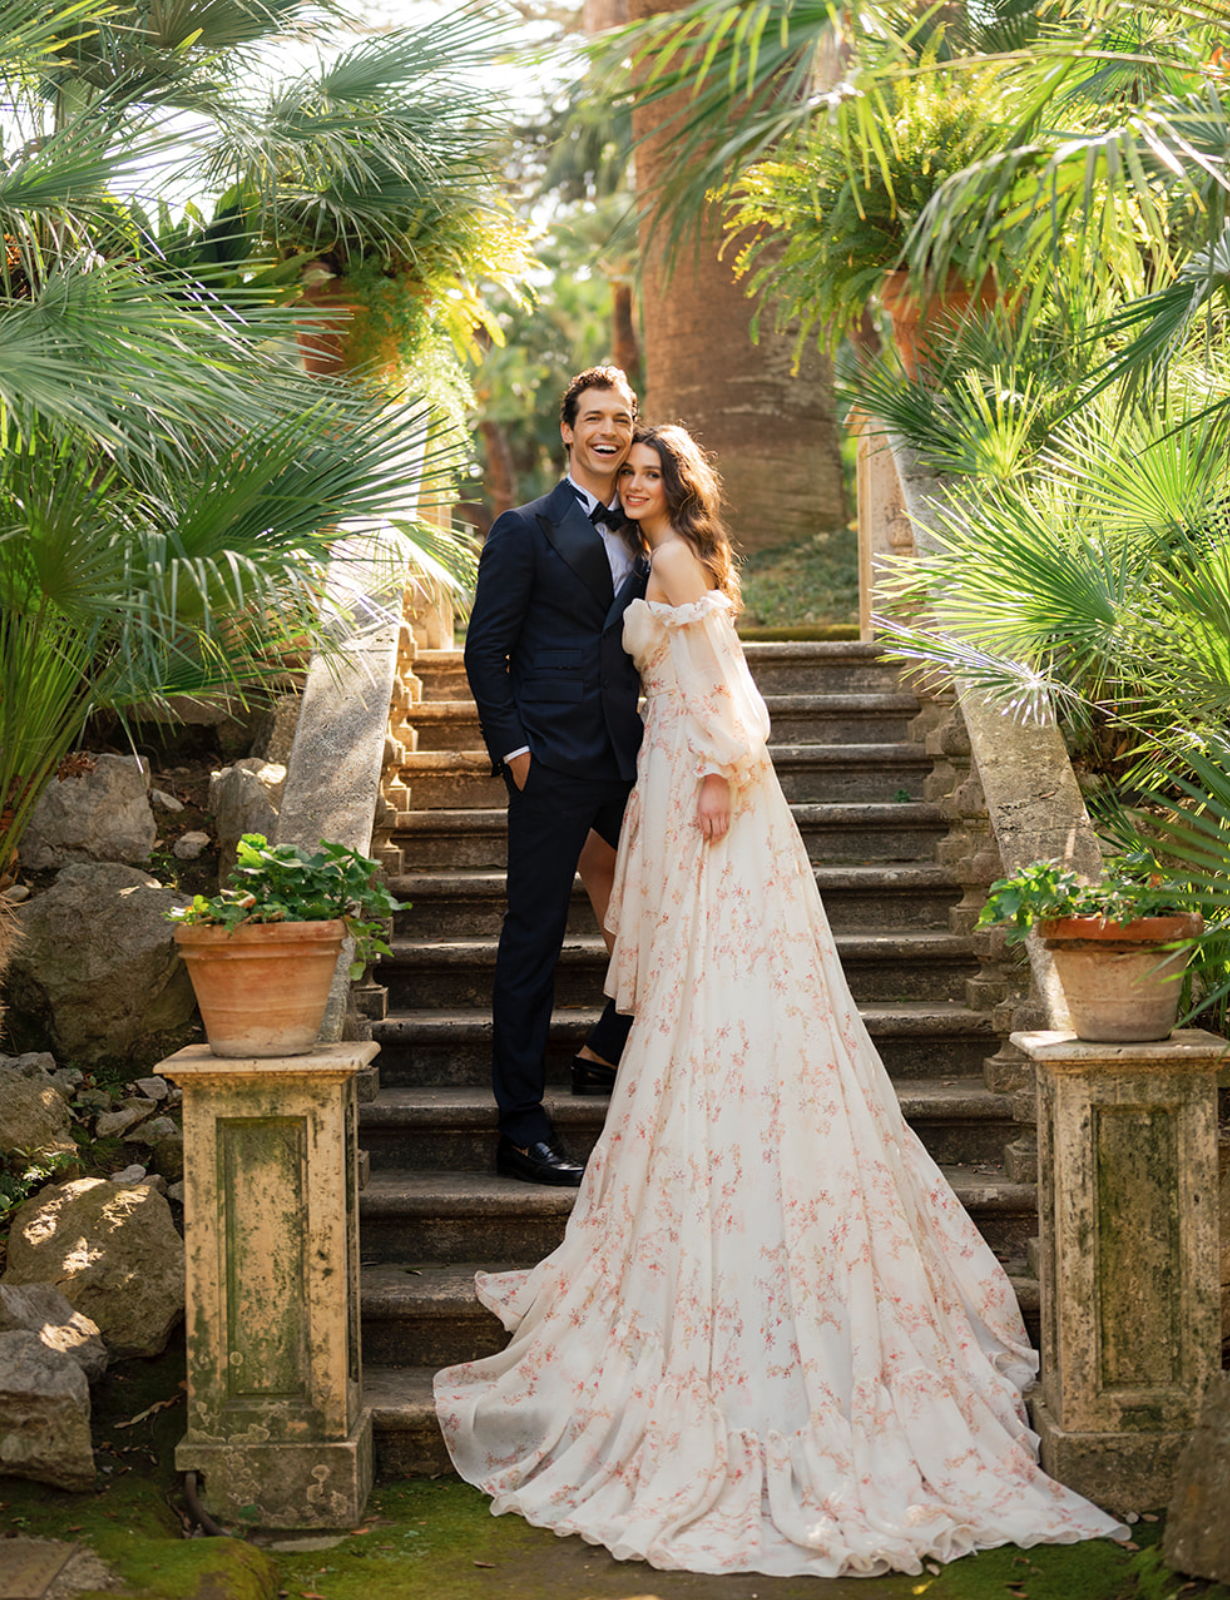 A bride and groom stand on outdoor stairs and smile while the sunlight hits their faces at their wedding venue in Amalfi Coast, Italy.